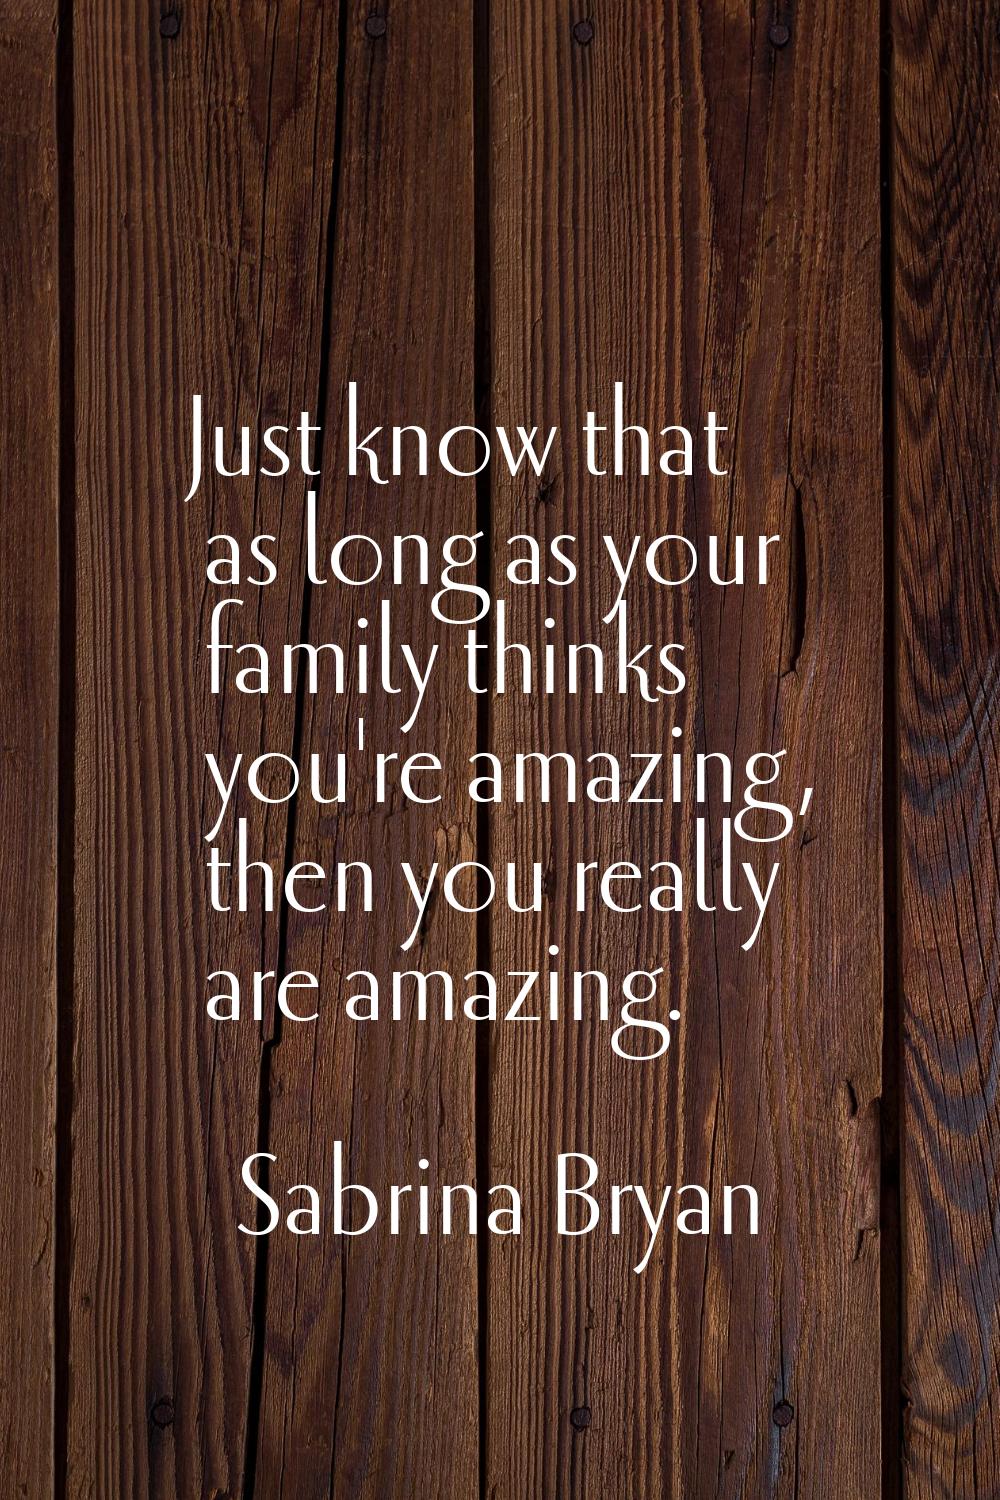 Just know that as long as your family thinks you're amazing, then you really are amazing.